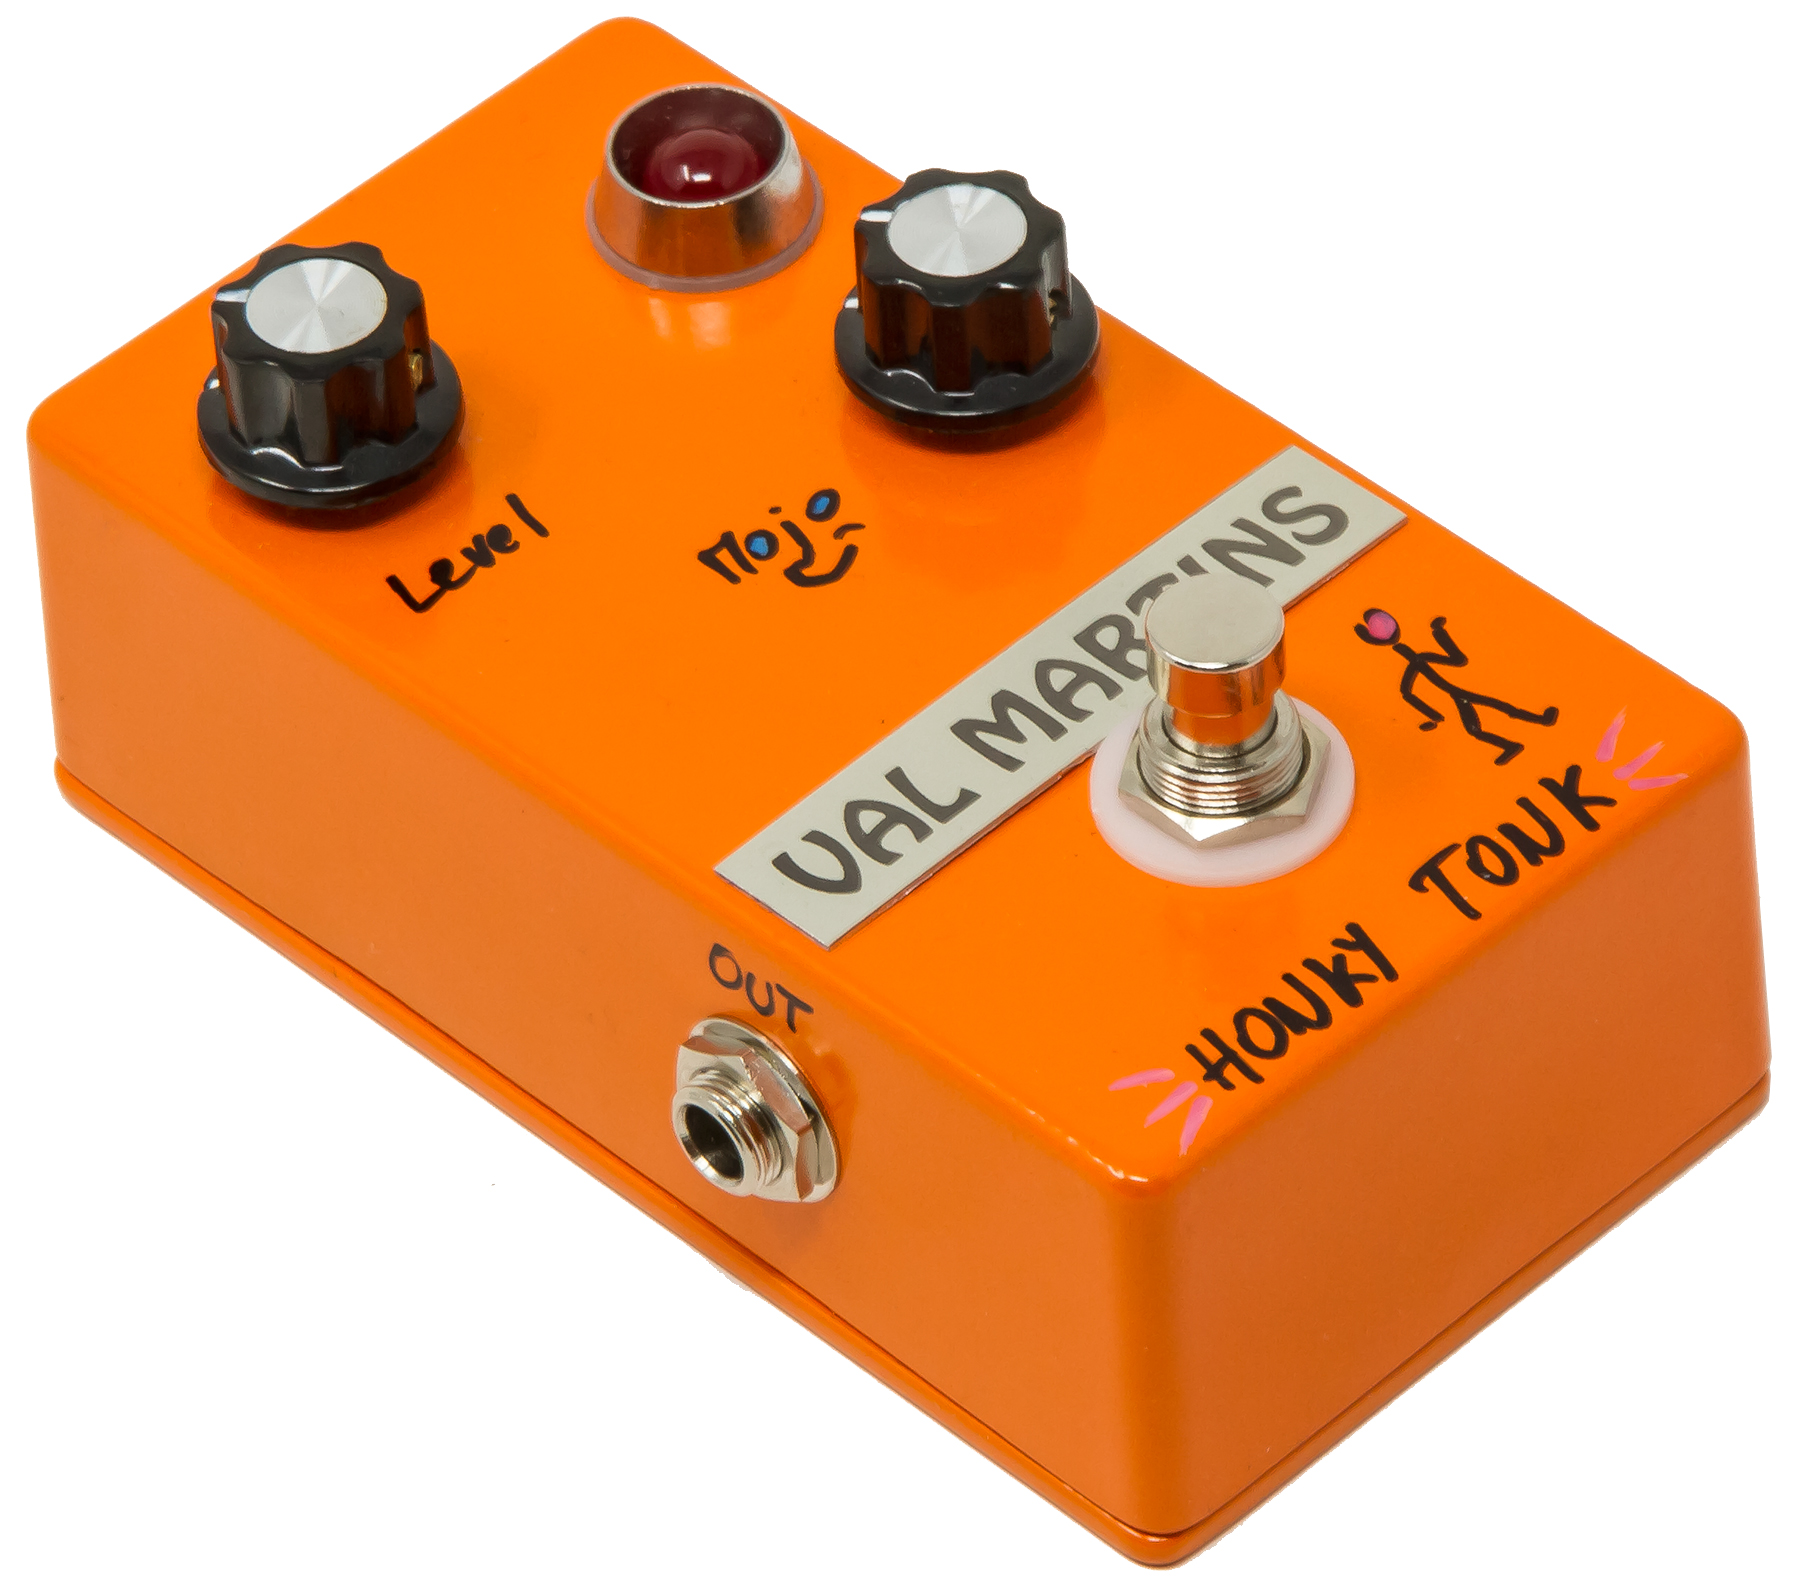 Val Martins Honky Tonk - Overdrive, distortion & fuzz effect pedal - Variation 1